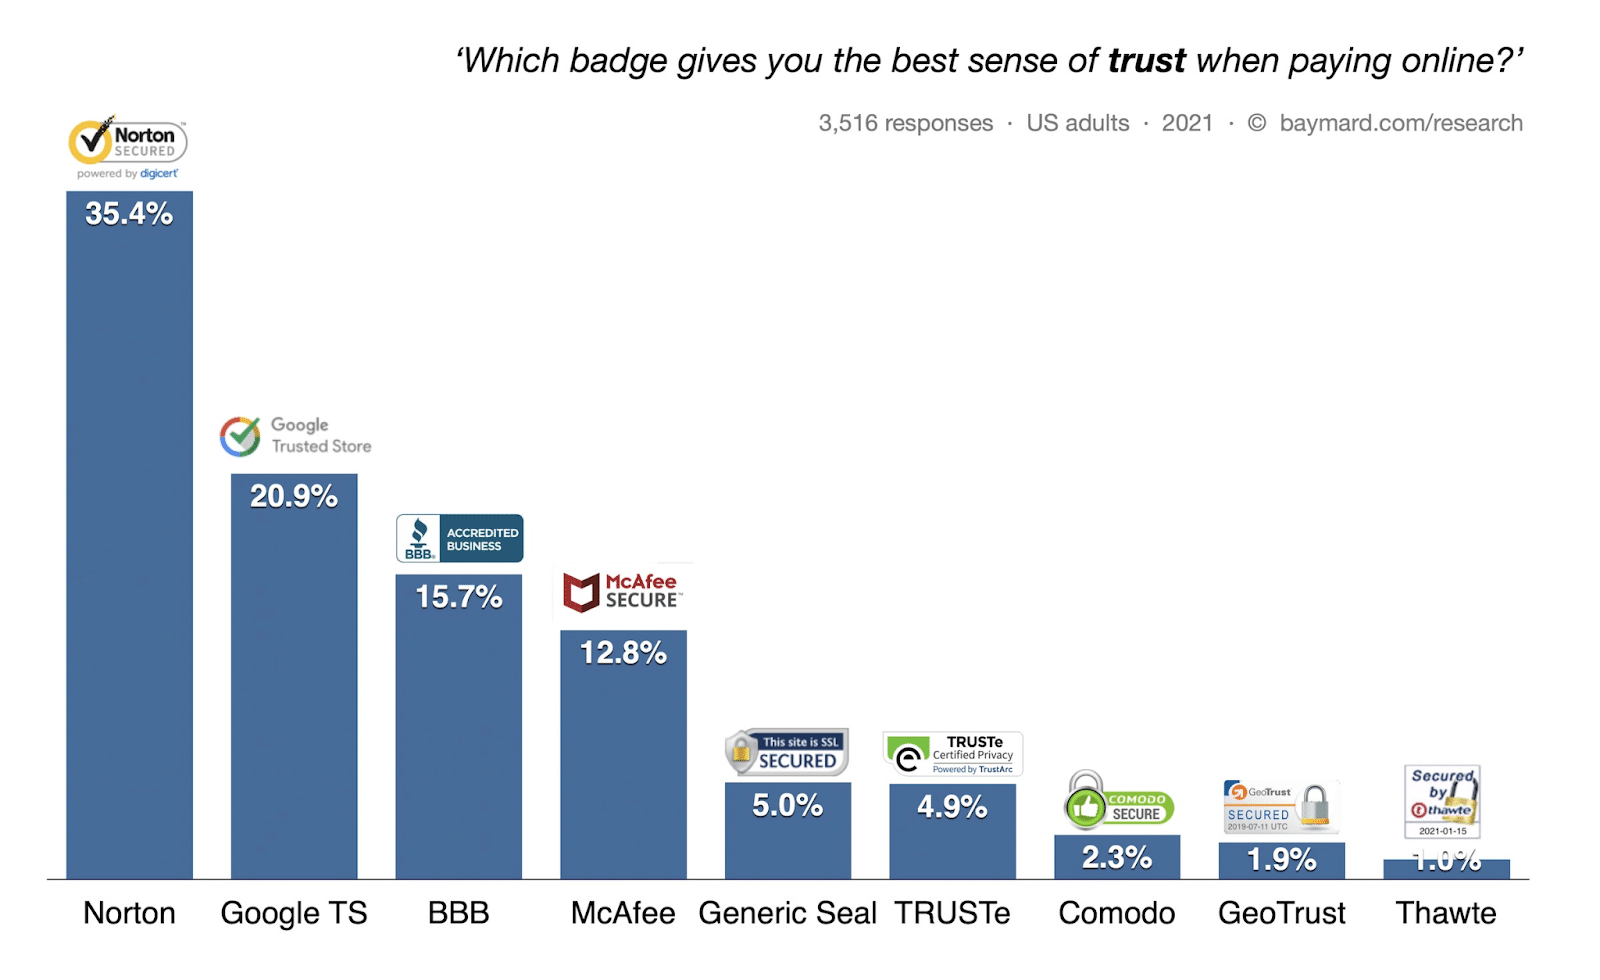 A bar graph with the title "Which badge gives you the best sense of trust when paying online?" with Norton in the lead at 35.4%.